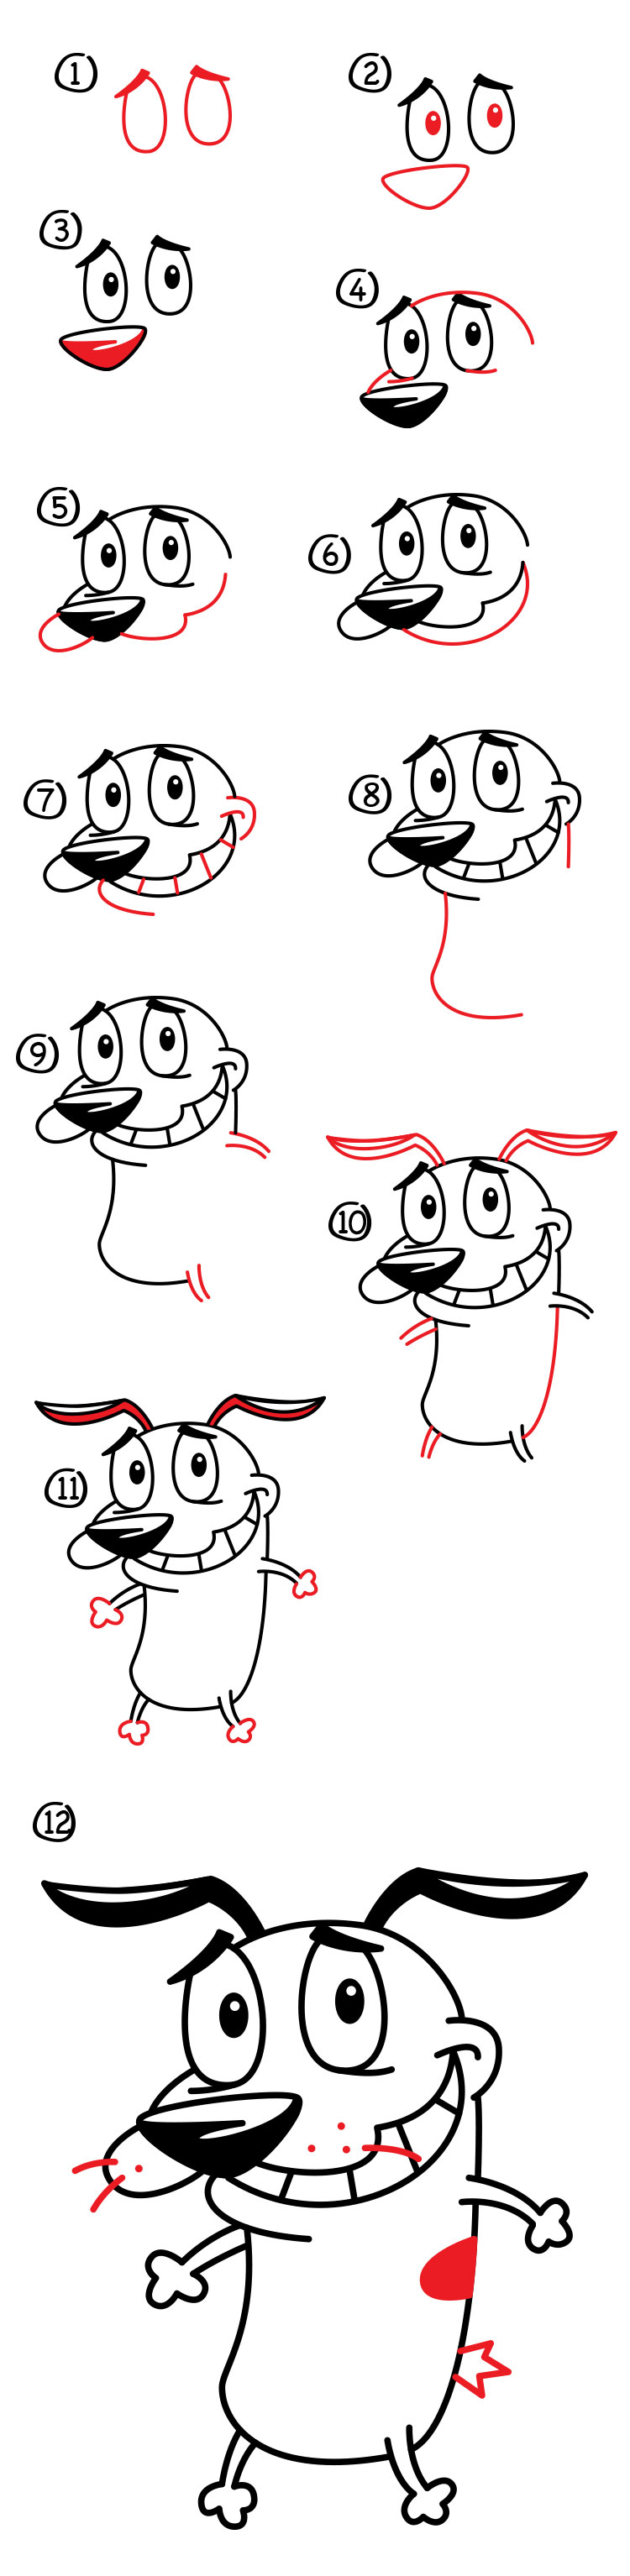 How To Draw Courage The Cowardly Dog Art For Kids Hub